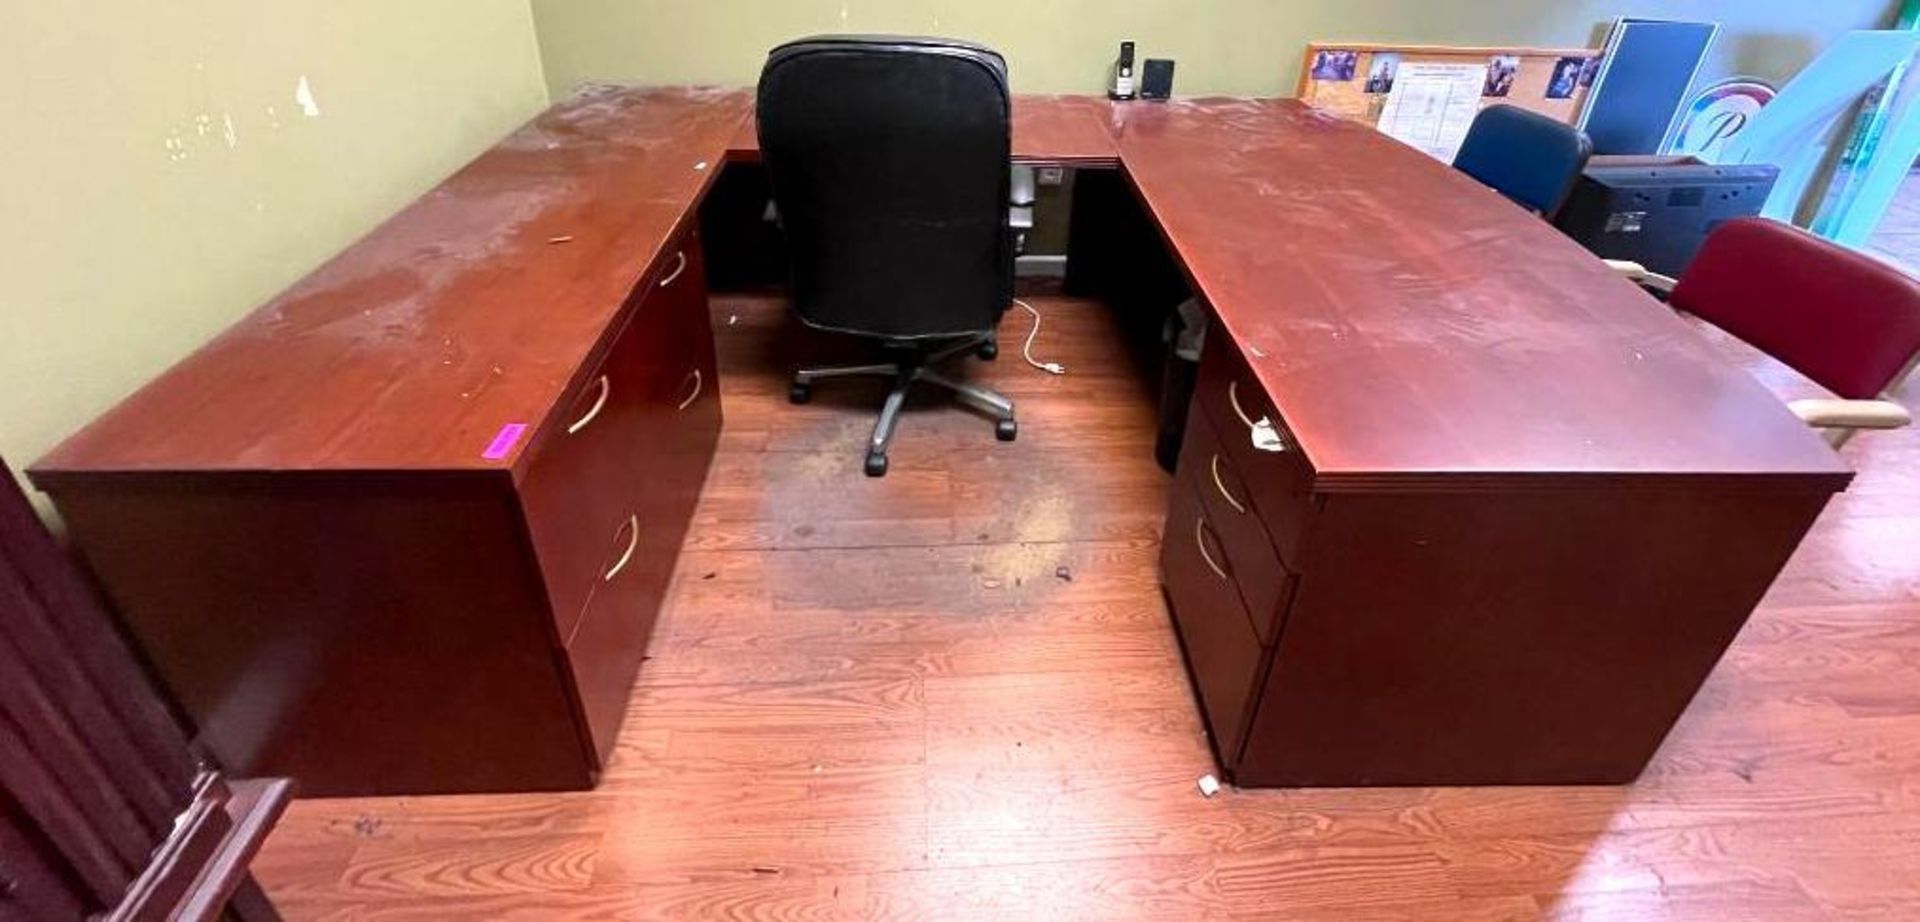 DESCRIPTION: U-SHAPED DESK UNIT WITH OFFICE CHAIR AND WOODEN FILING CABINET (PICTURED SEPARATELY) QT